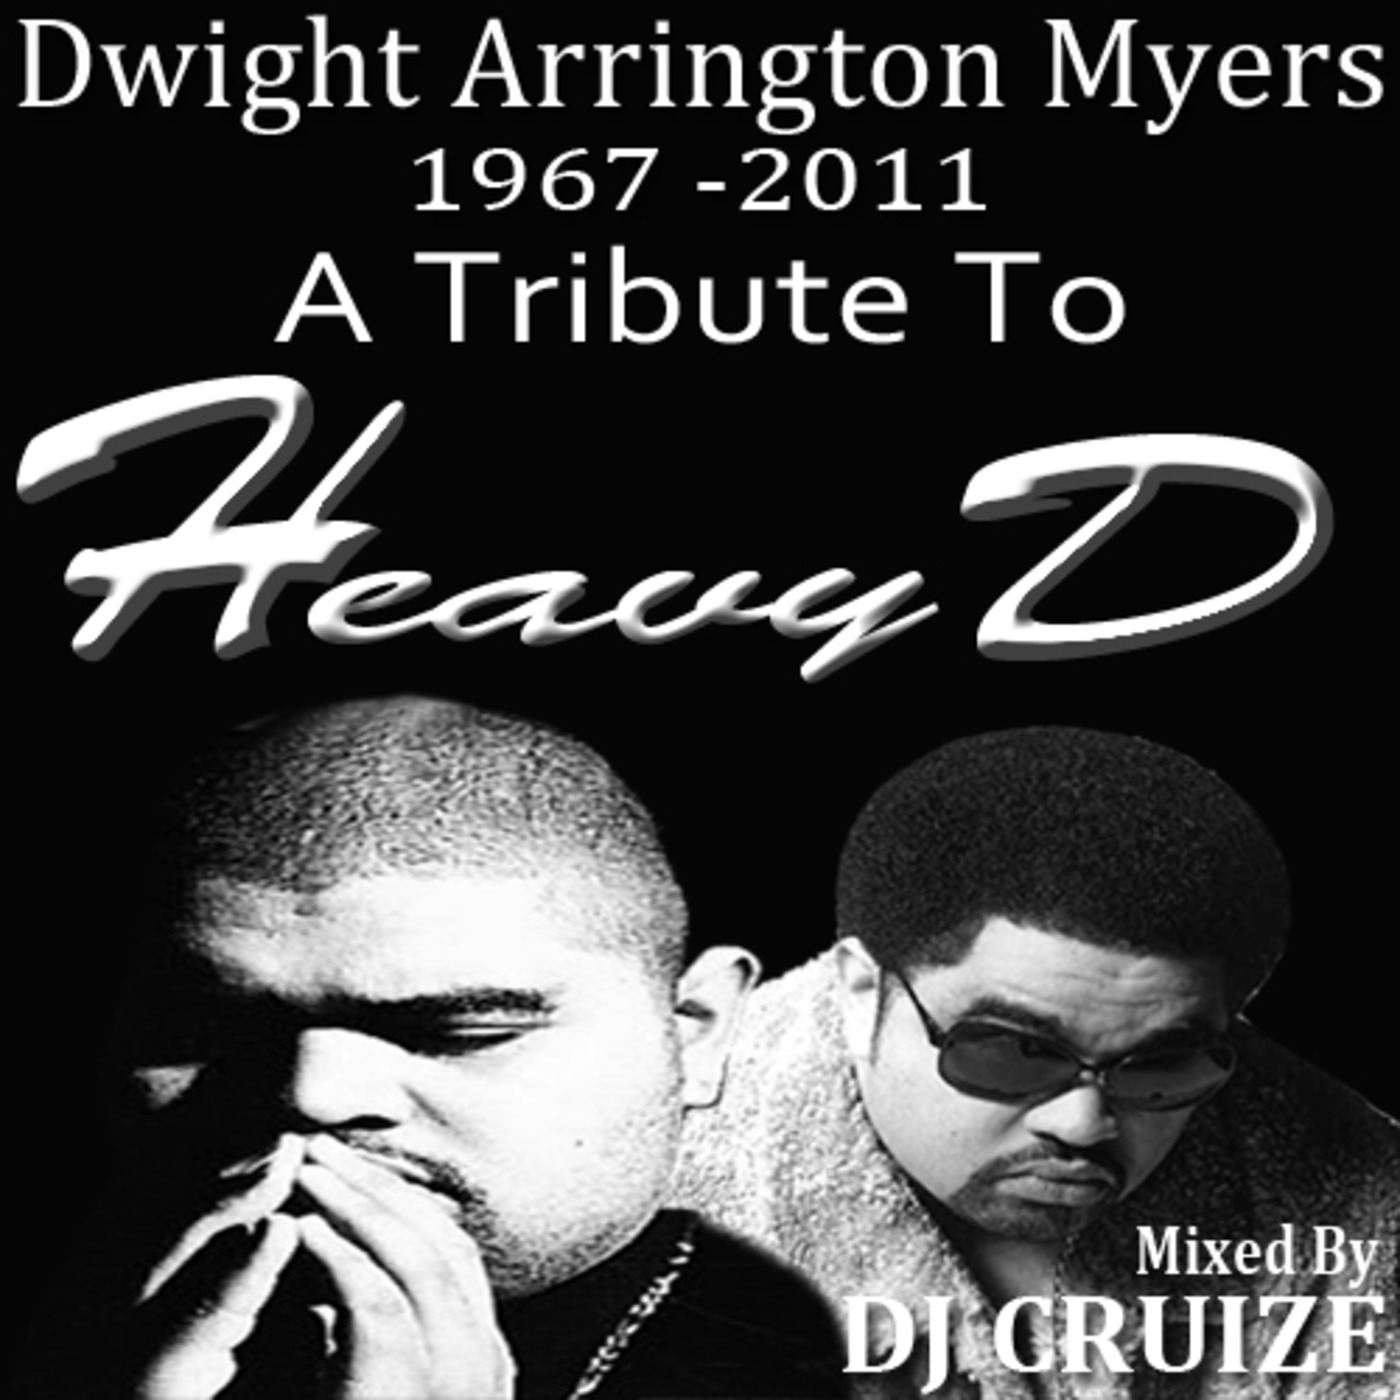 A Tribute To Heavy D